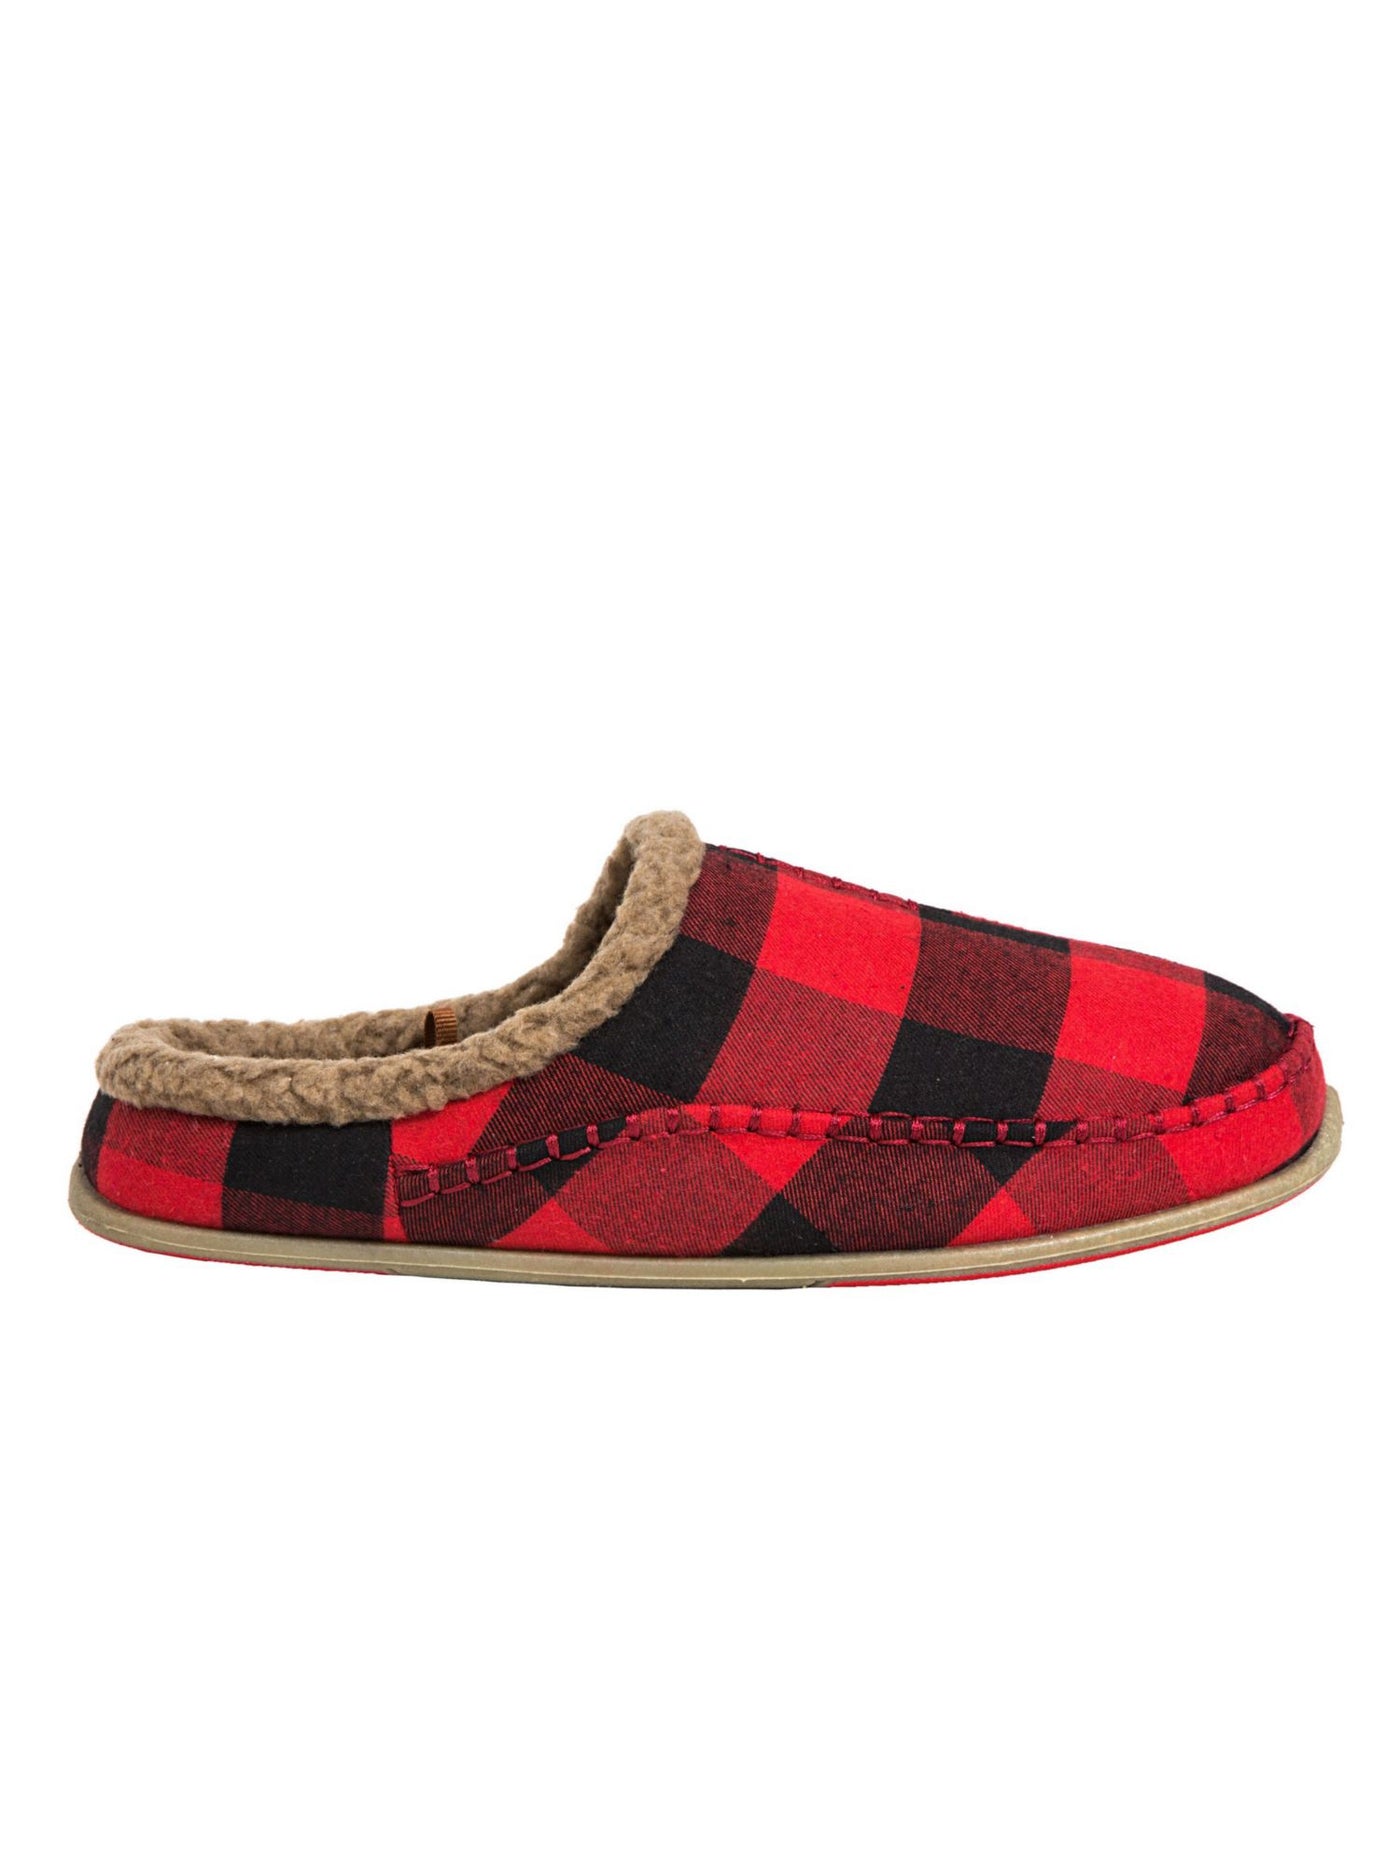 DEER STAGS SLIPPEROOZ Mens Red Plaid Comfort Nordic Round Toe Platform Slip On Slippers Shoes 10 M